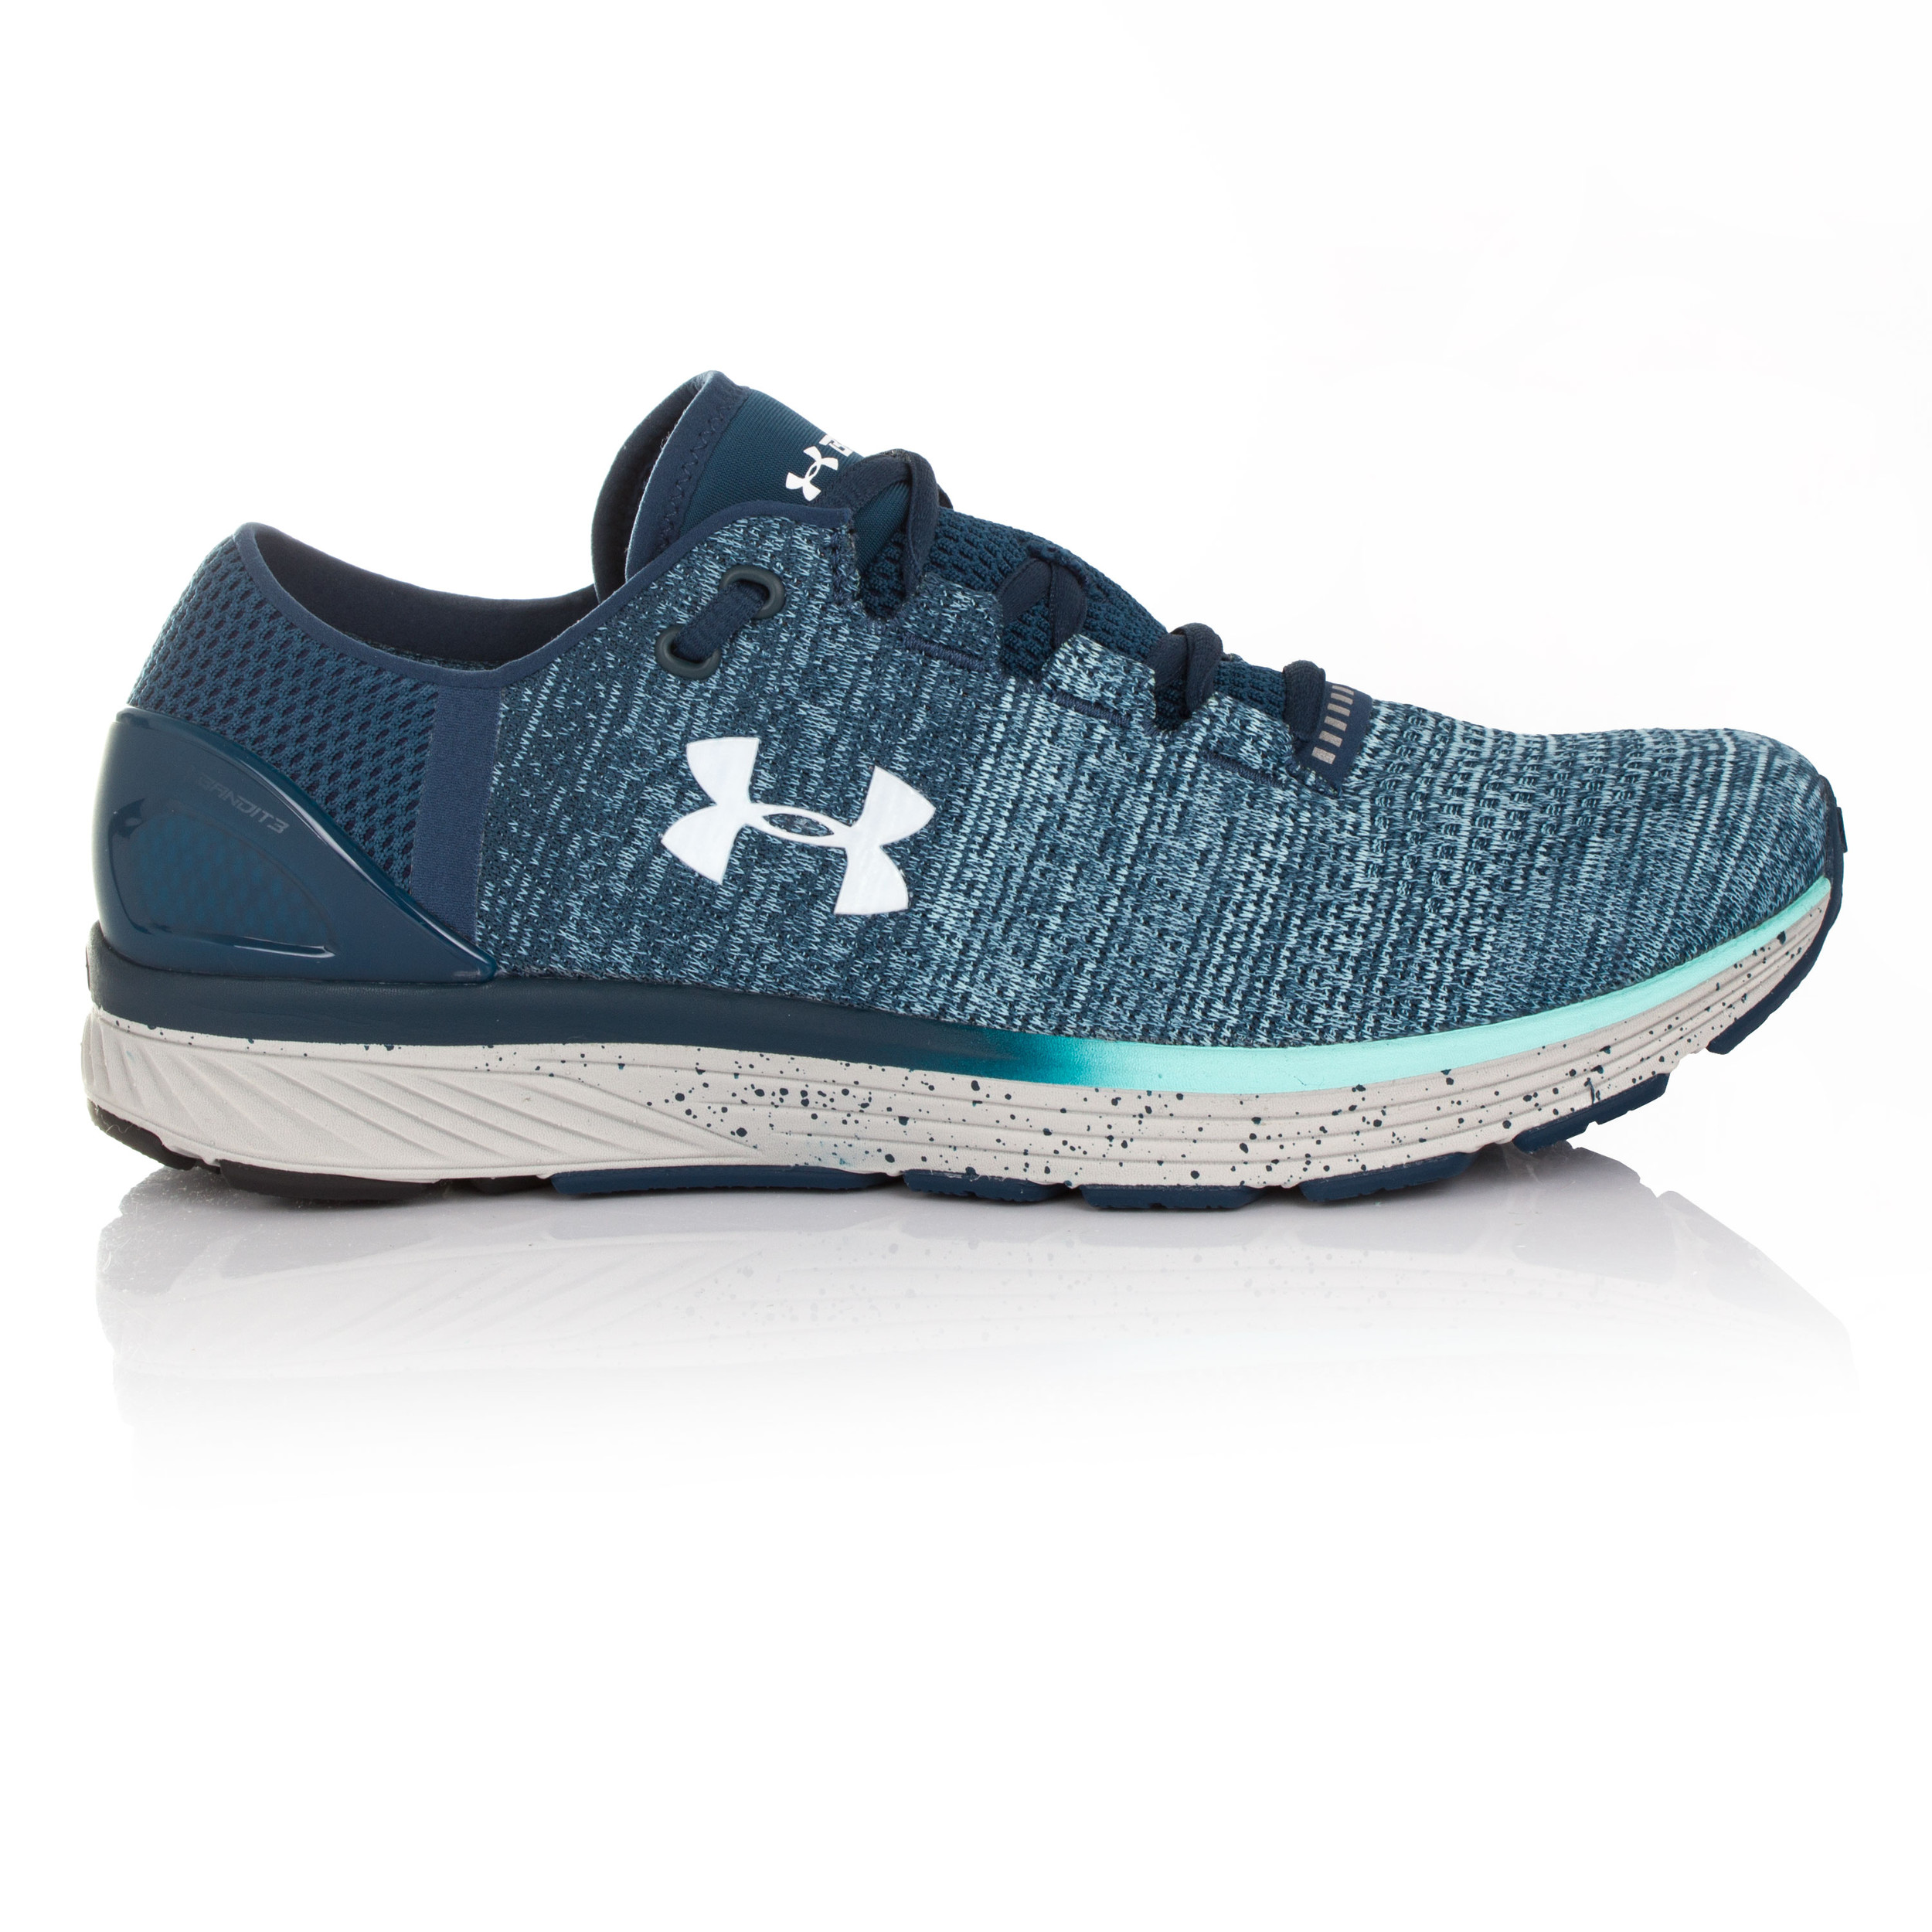 Under Armour Charged Bandit 3 femmes chaussures de running - AW17